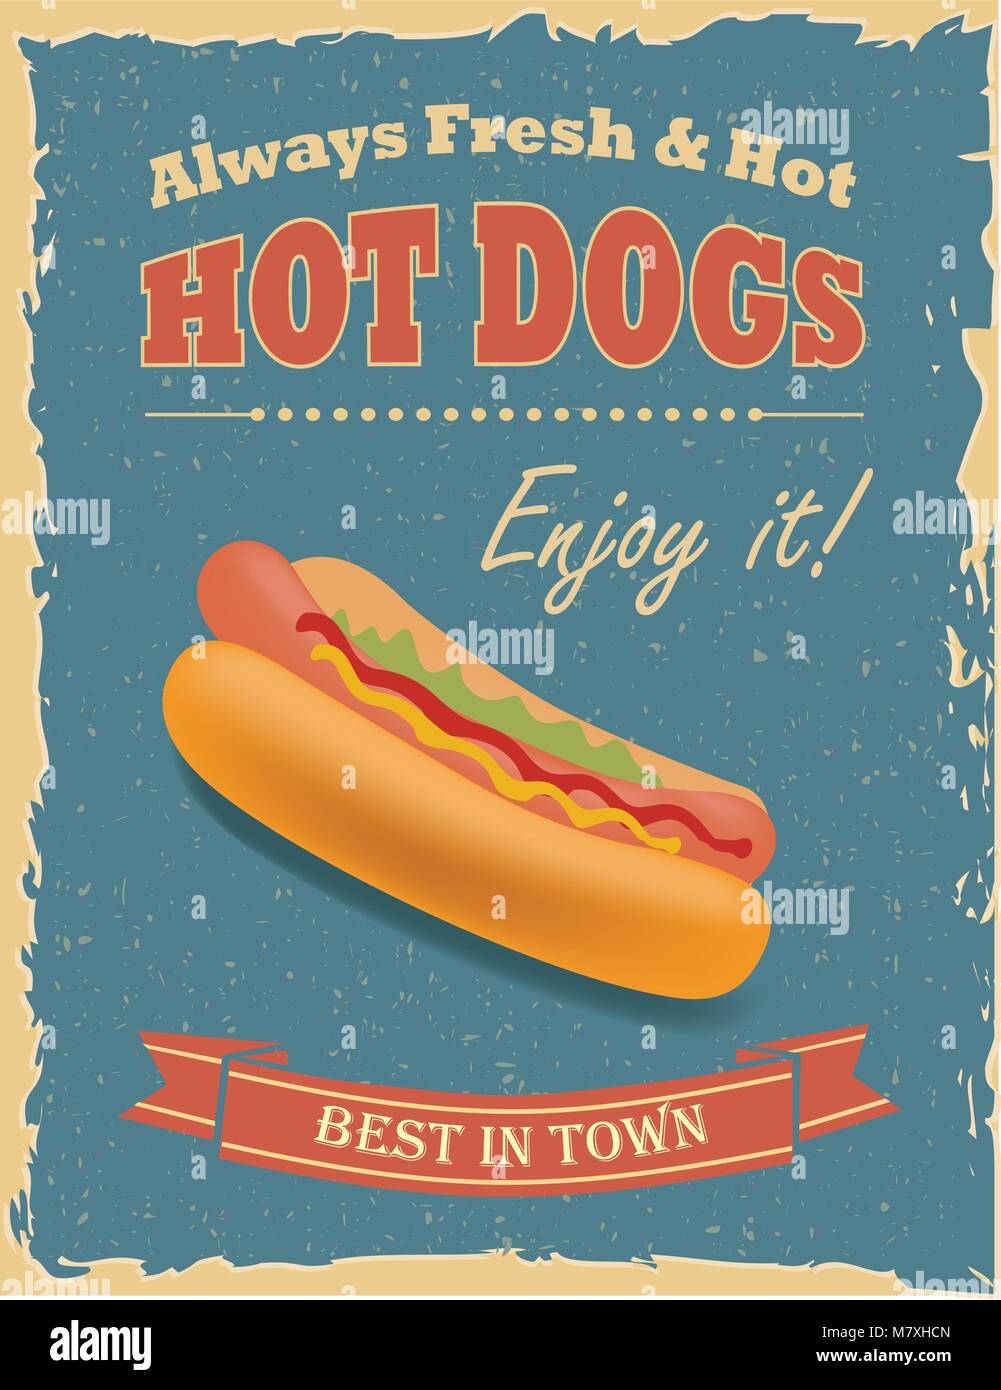 Vintage Hot Dogs poster with grunge effects. Stock Vector